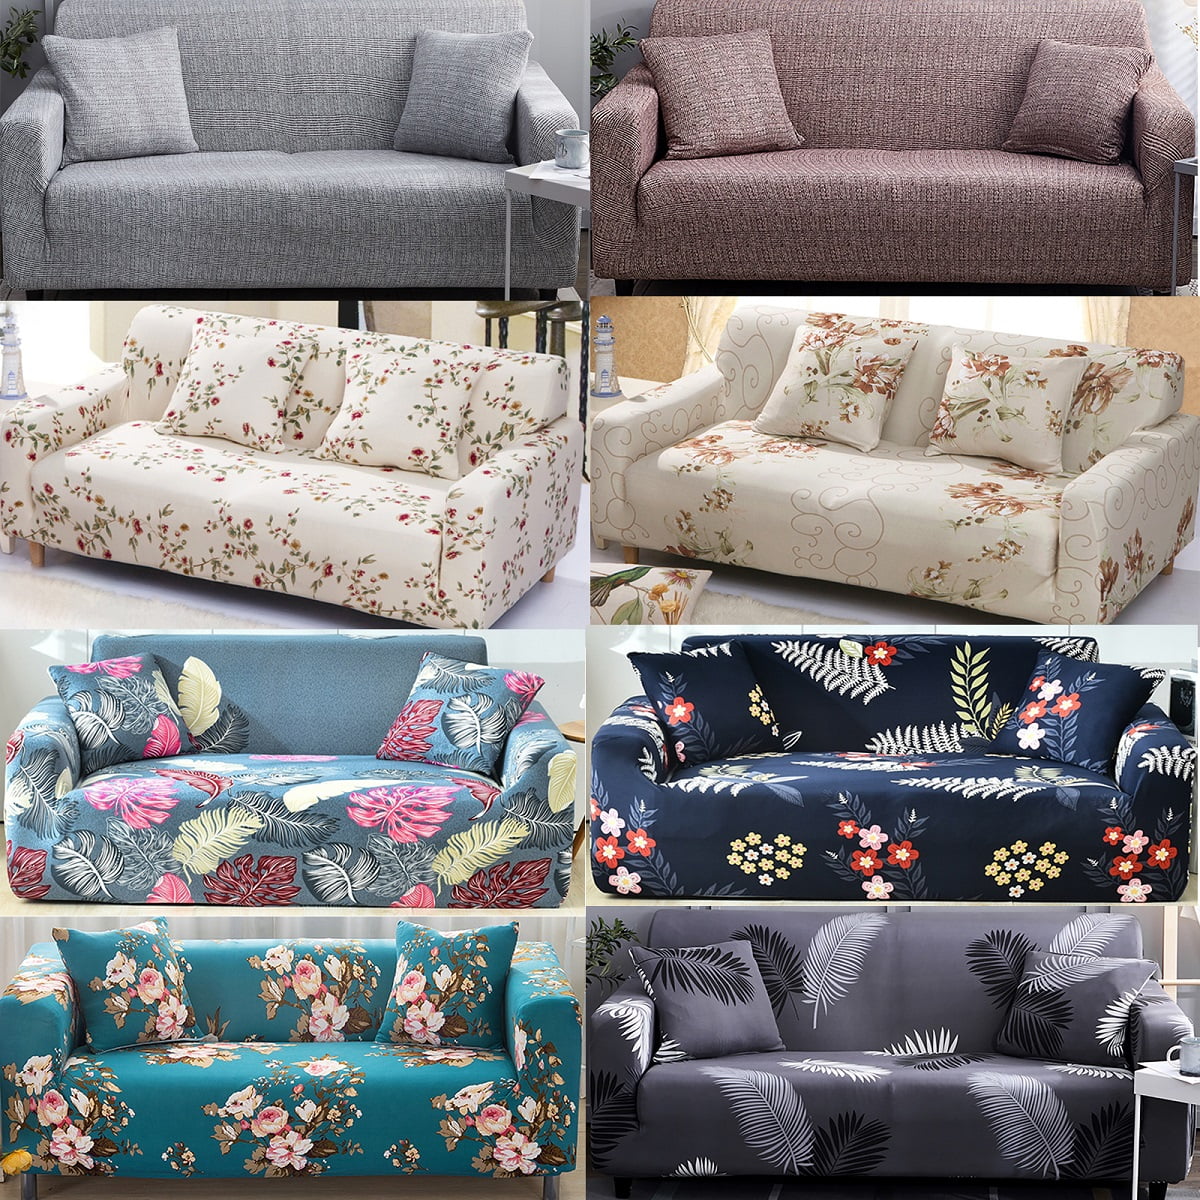 1 2 3 4 Seat  Stretch Sofa Loveseat Cover Slipcover Elastic Couch Protector Set 